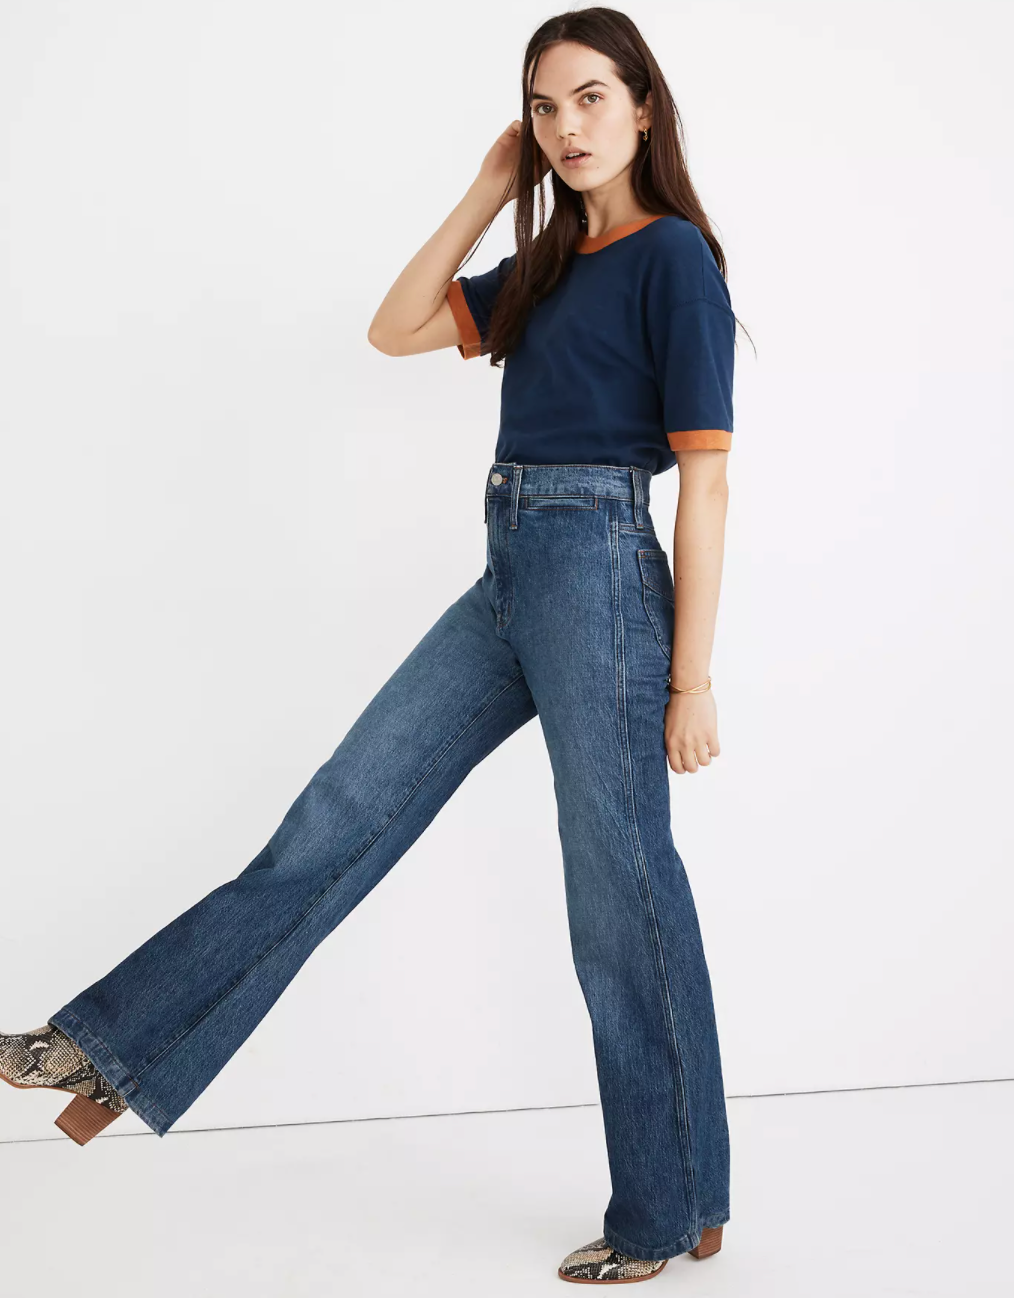 Madewell + 11″ High-Rise Flare Jeans in Mersey Wash: Welt Pocket Edition